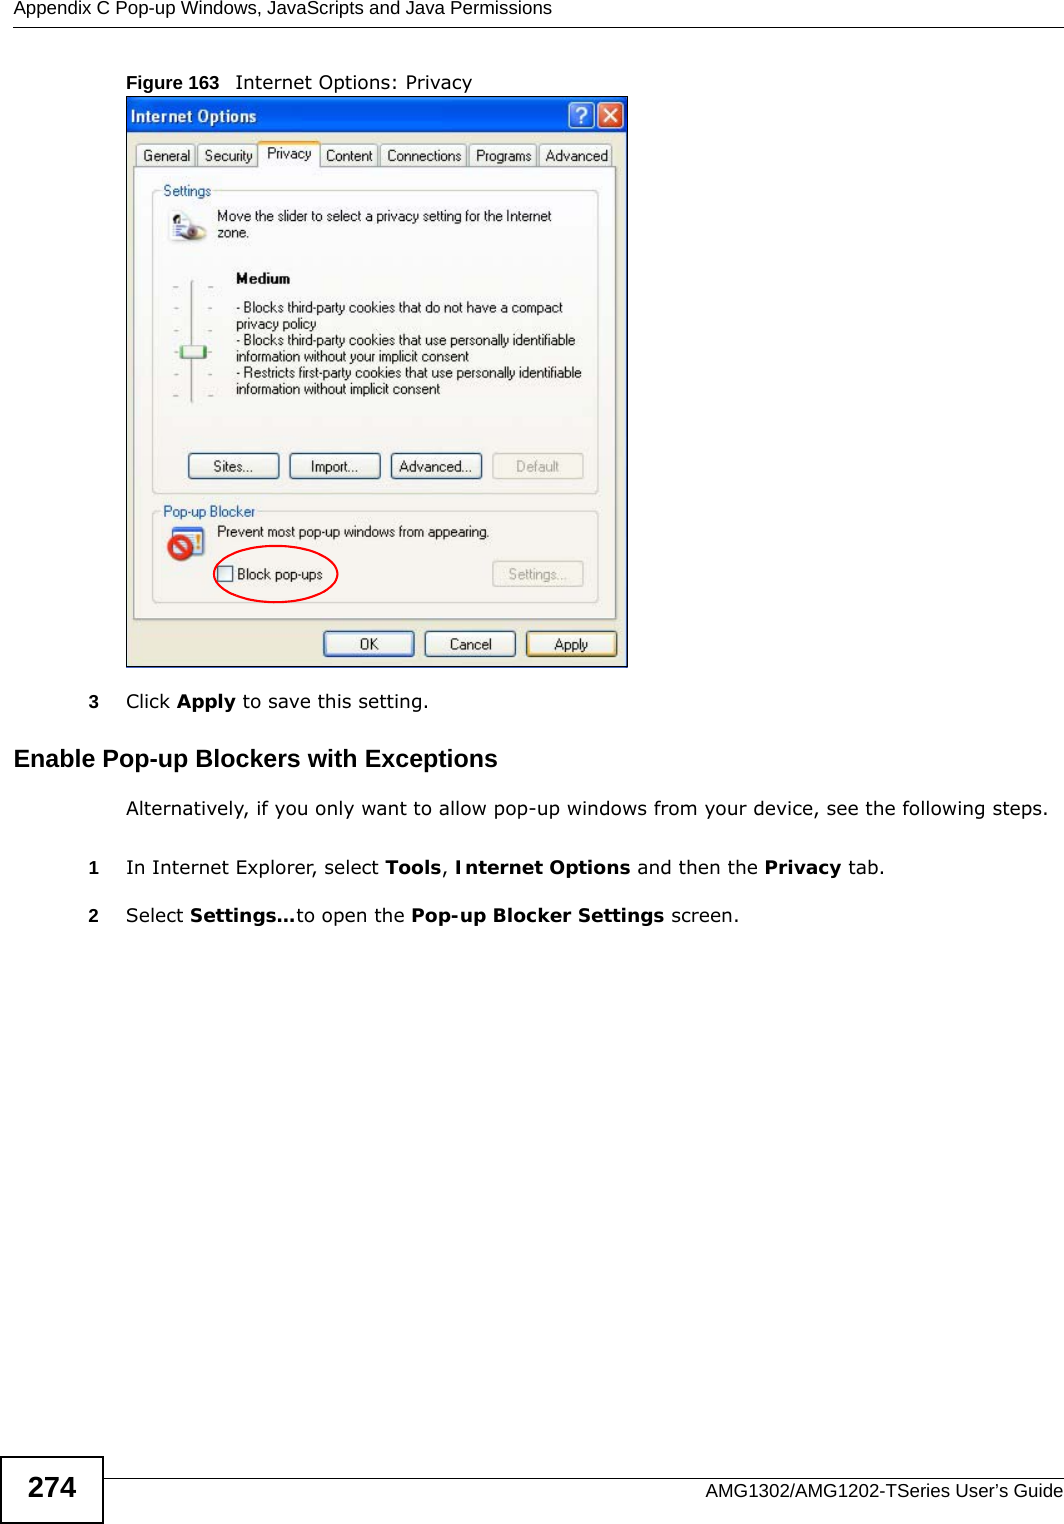 Appendix C Pop-up Windows, JavaScripts and Java PermissionsAMG1302/AMG1202-TSeries User’s Guide274Figure 163   Internet Options: Privacy3Click Apply to save this setting.Enable Pop-up Blockers with ExceptionsAlternatively, if you only want to allow pop-up windows from your device, see the following steps.1In Internet Explorer, select Tools, Internet Options and then the Privacy tab. 2Select Settings…to open the Pop-up Blocker Settings screen.